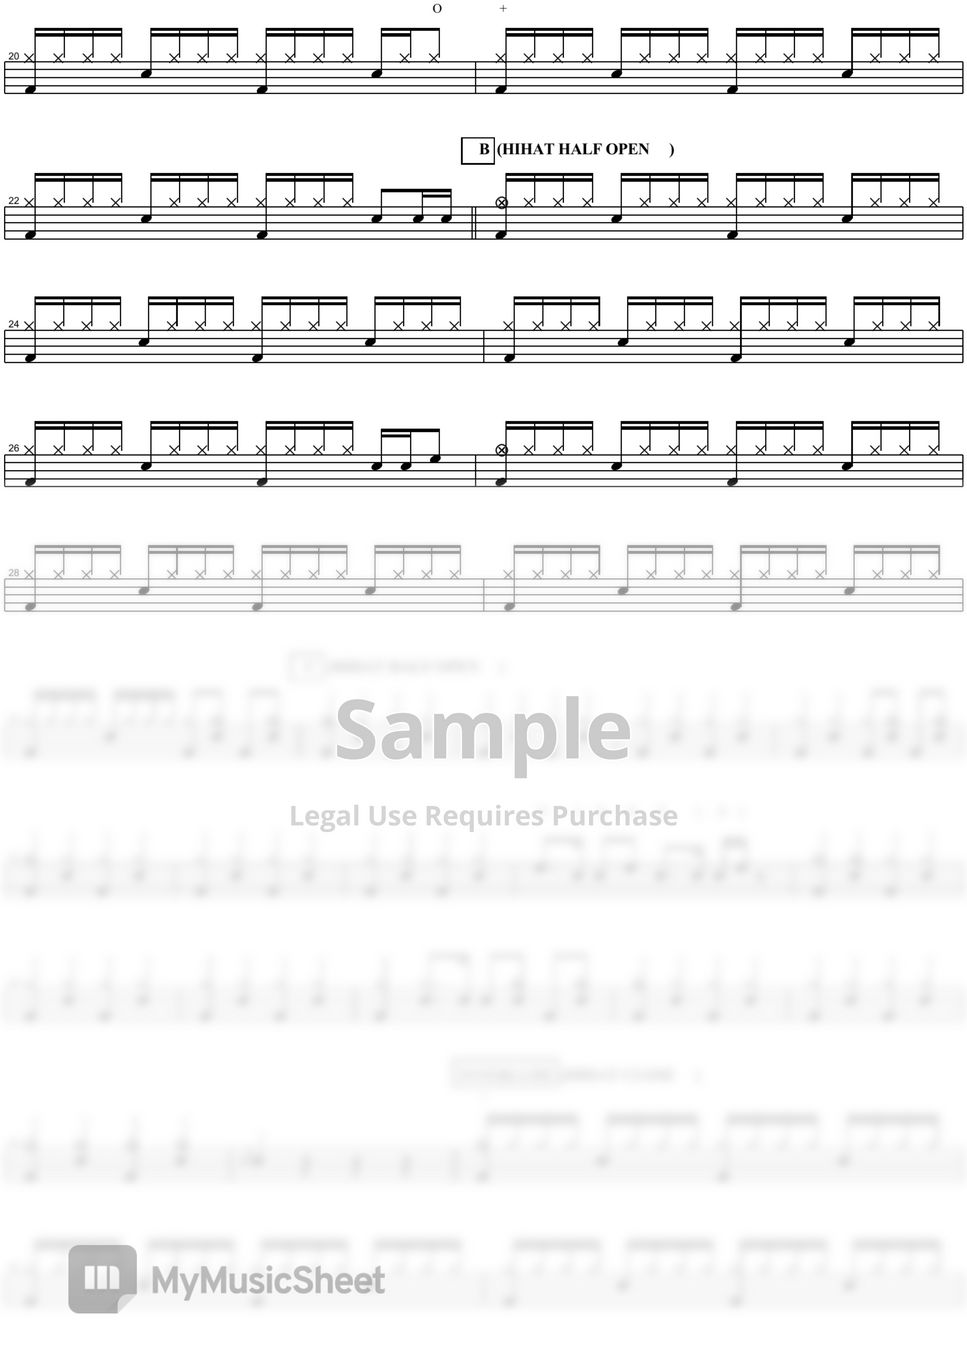 Simple Plan - Take My Hand Sheet by COPYDRUM